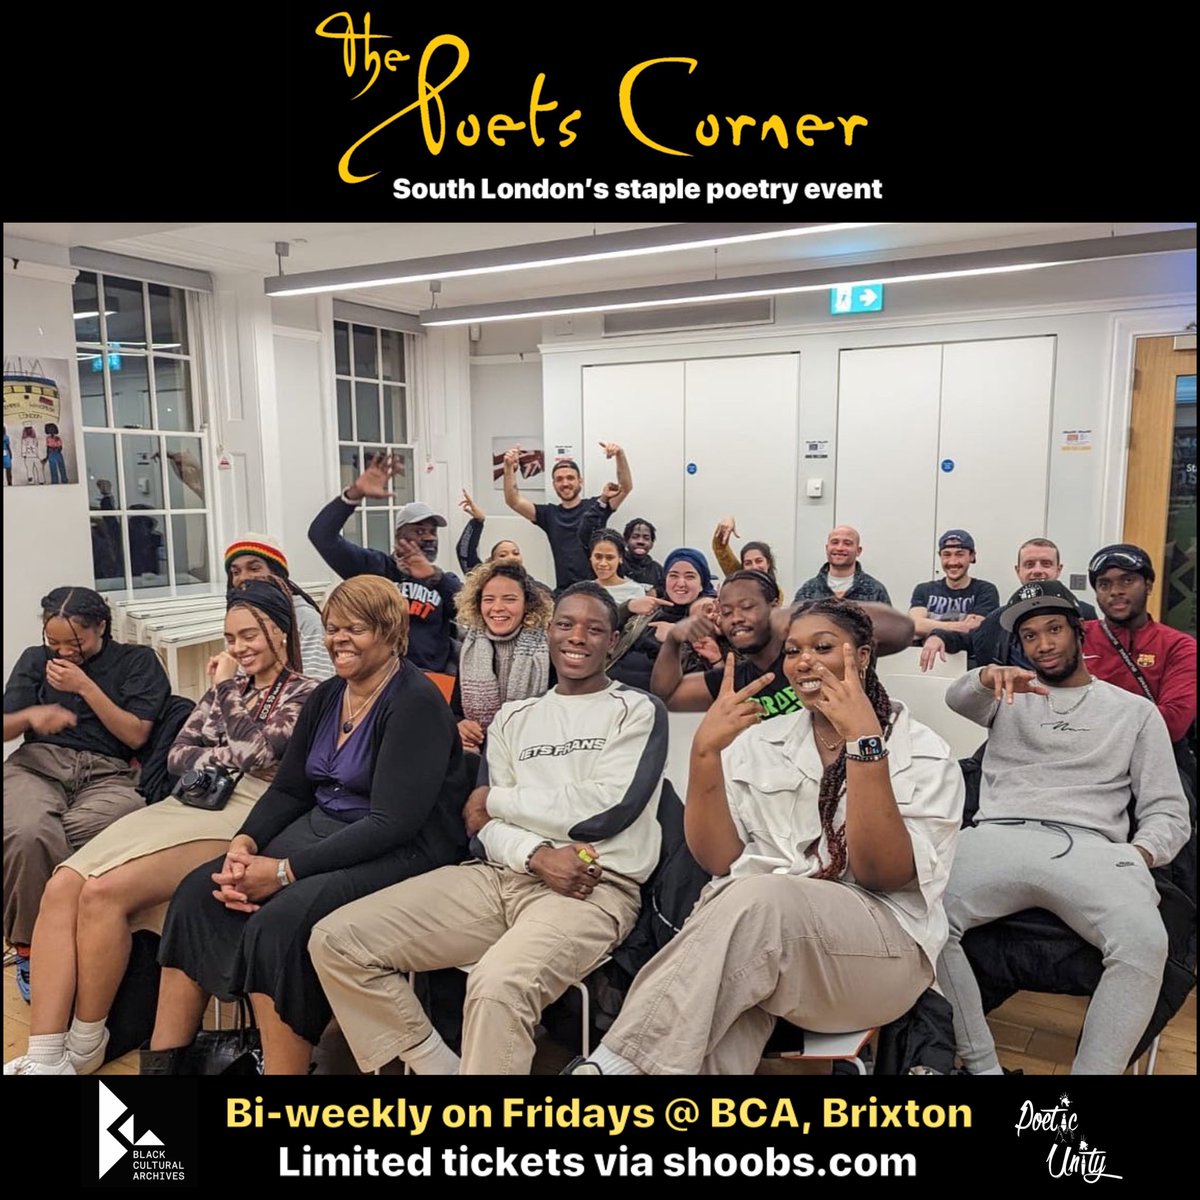 TONIGHT! LIMITED TICKETS LEFT! The Poets Corner is LIVE (in person) @bcaheritage from 6.30pm 💥 Come down and hear some of the UKs best poets! Limited tickets available here: shoobs.com/events/90891/t… Open mic sign up for ticket holders between 6.30pm-7pm. #ThePoetsCorner